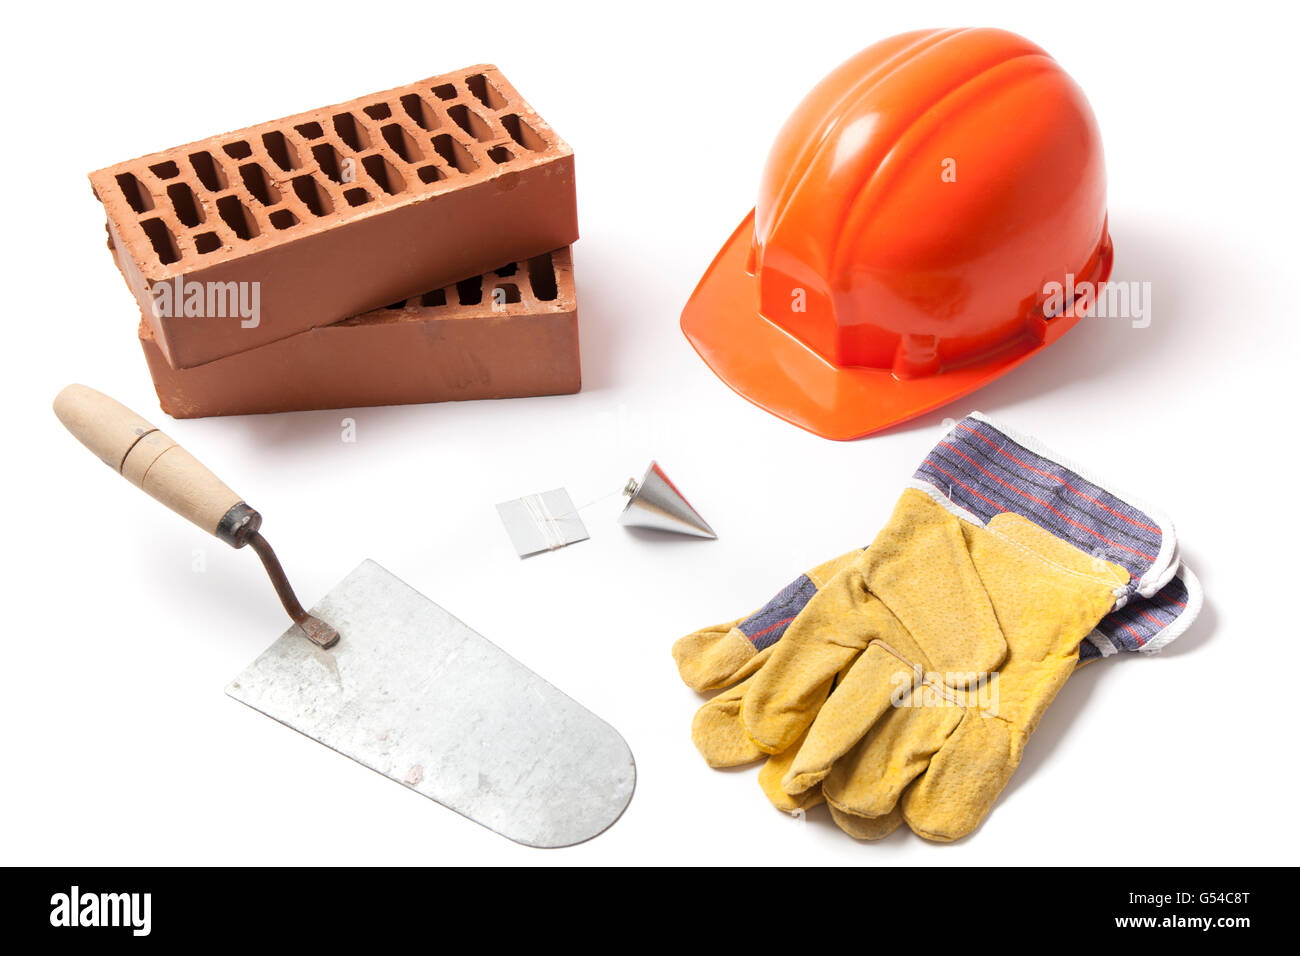 Several construction accessories trowel, bricks, plummet, hard hat and gloves isolated on white background. Stock Photo